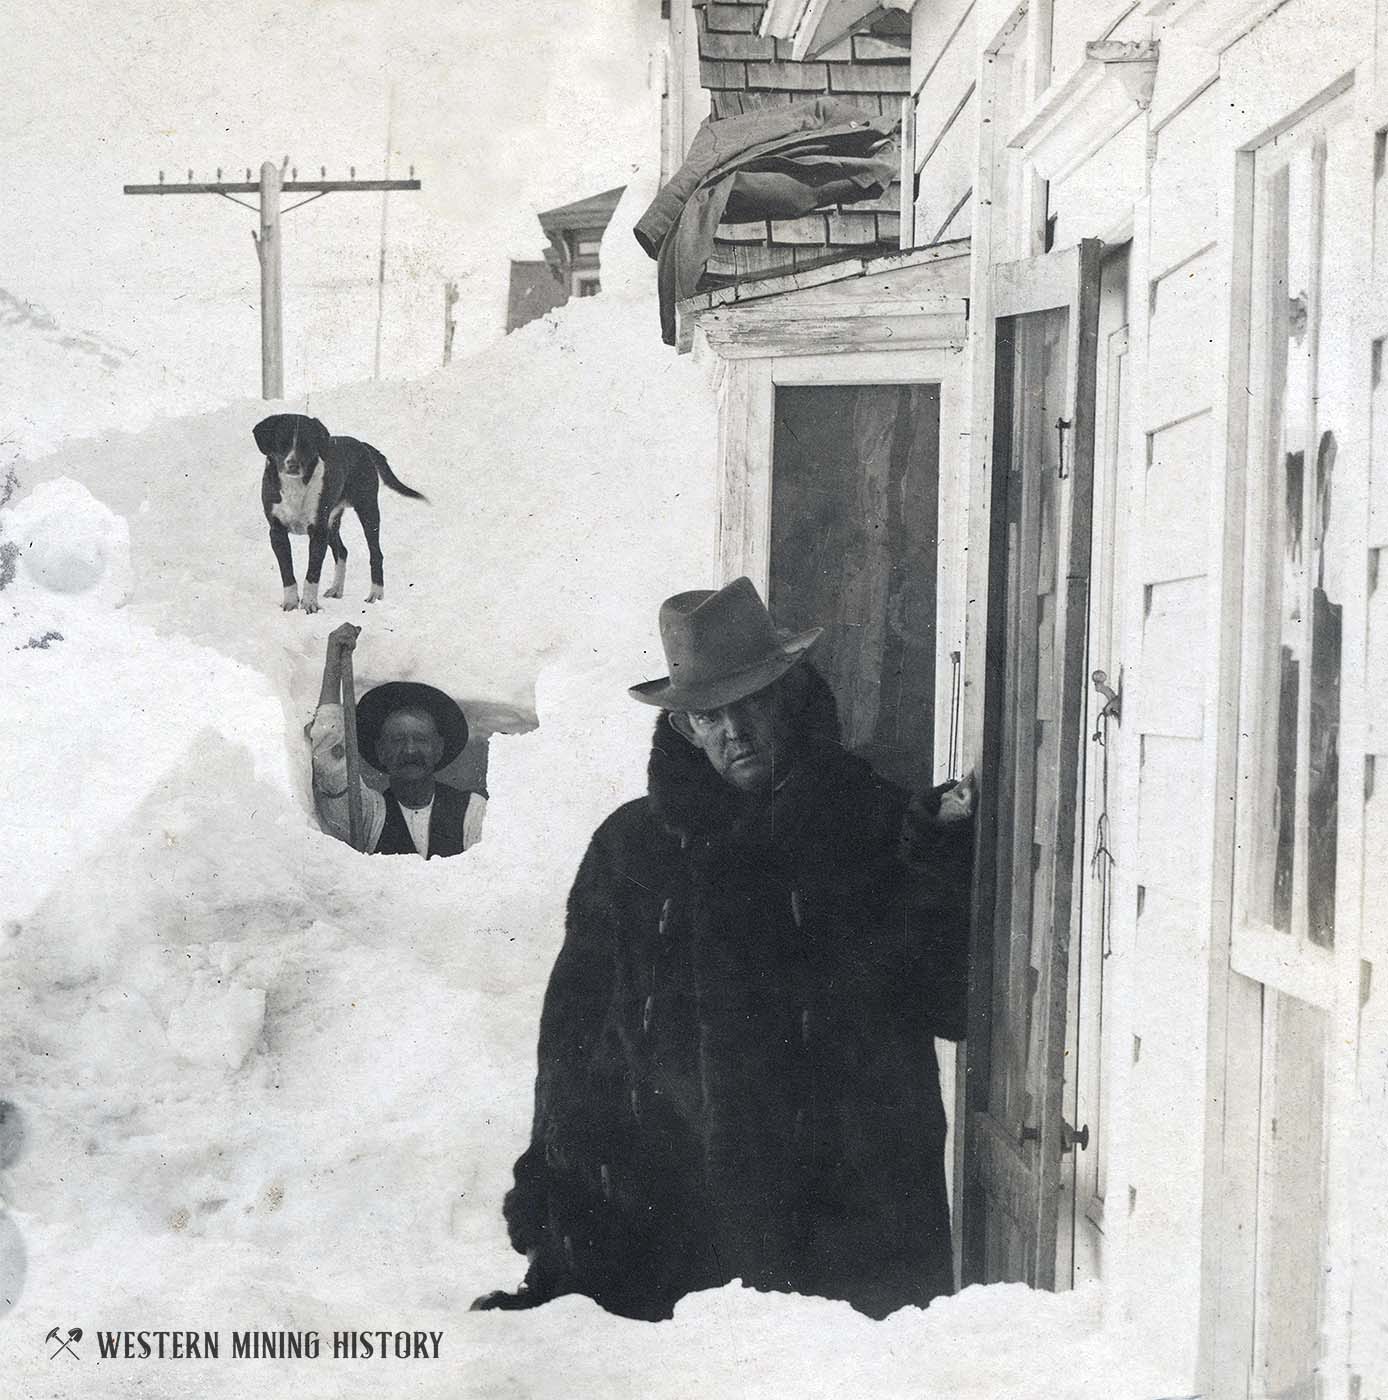 Digging out - Bodie, California March, 1911